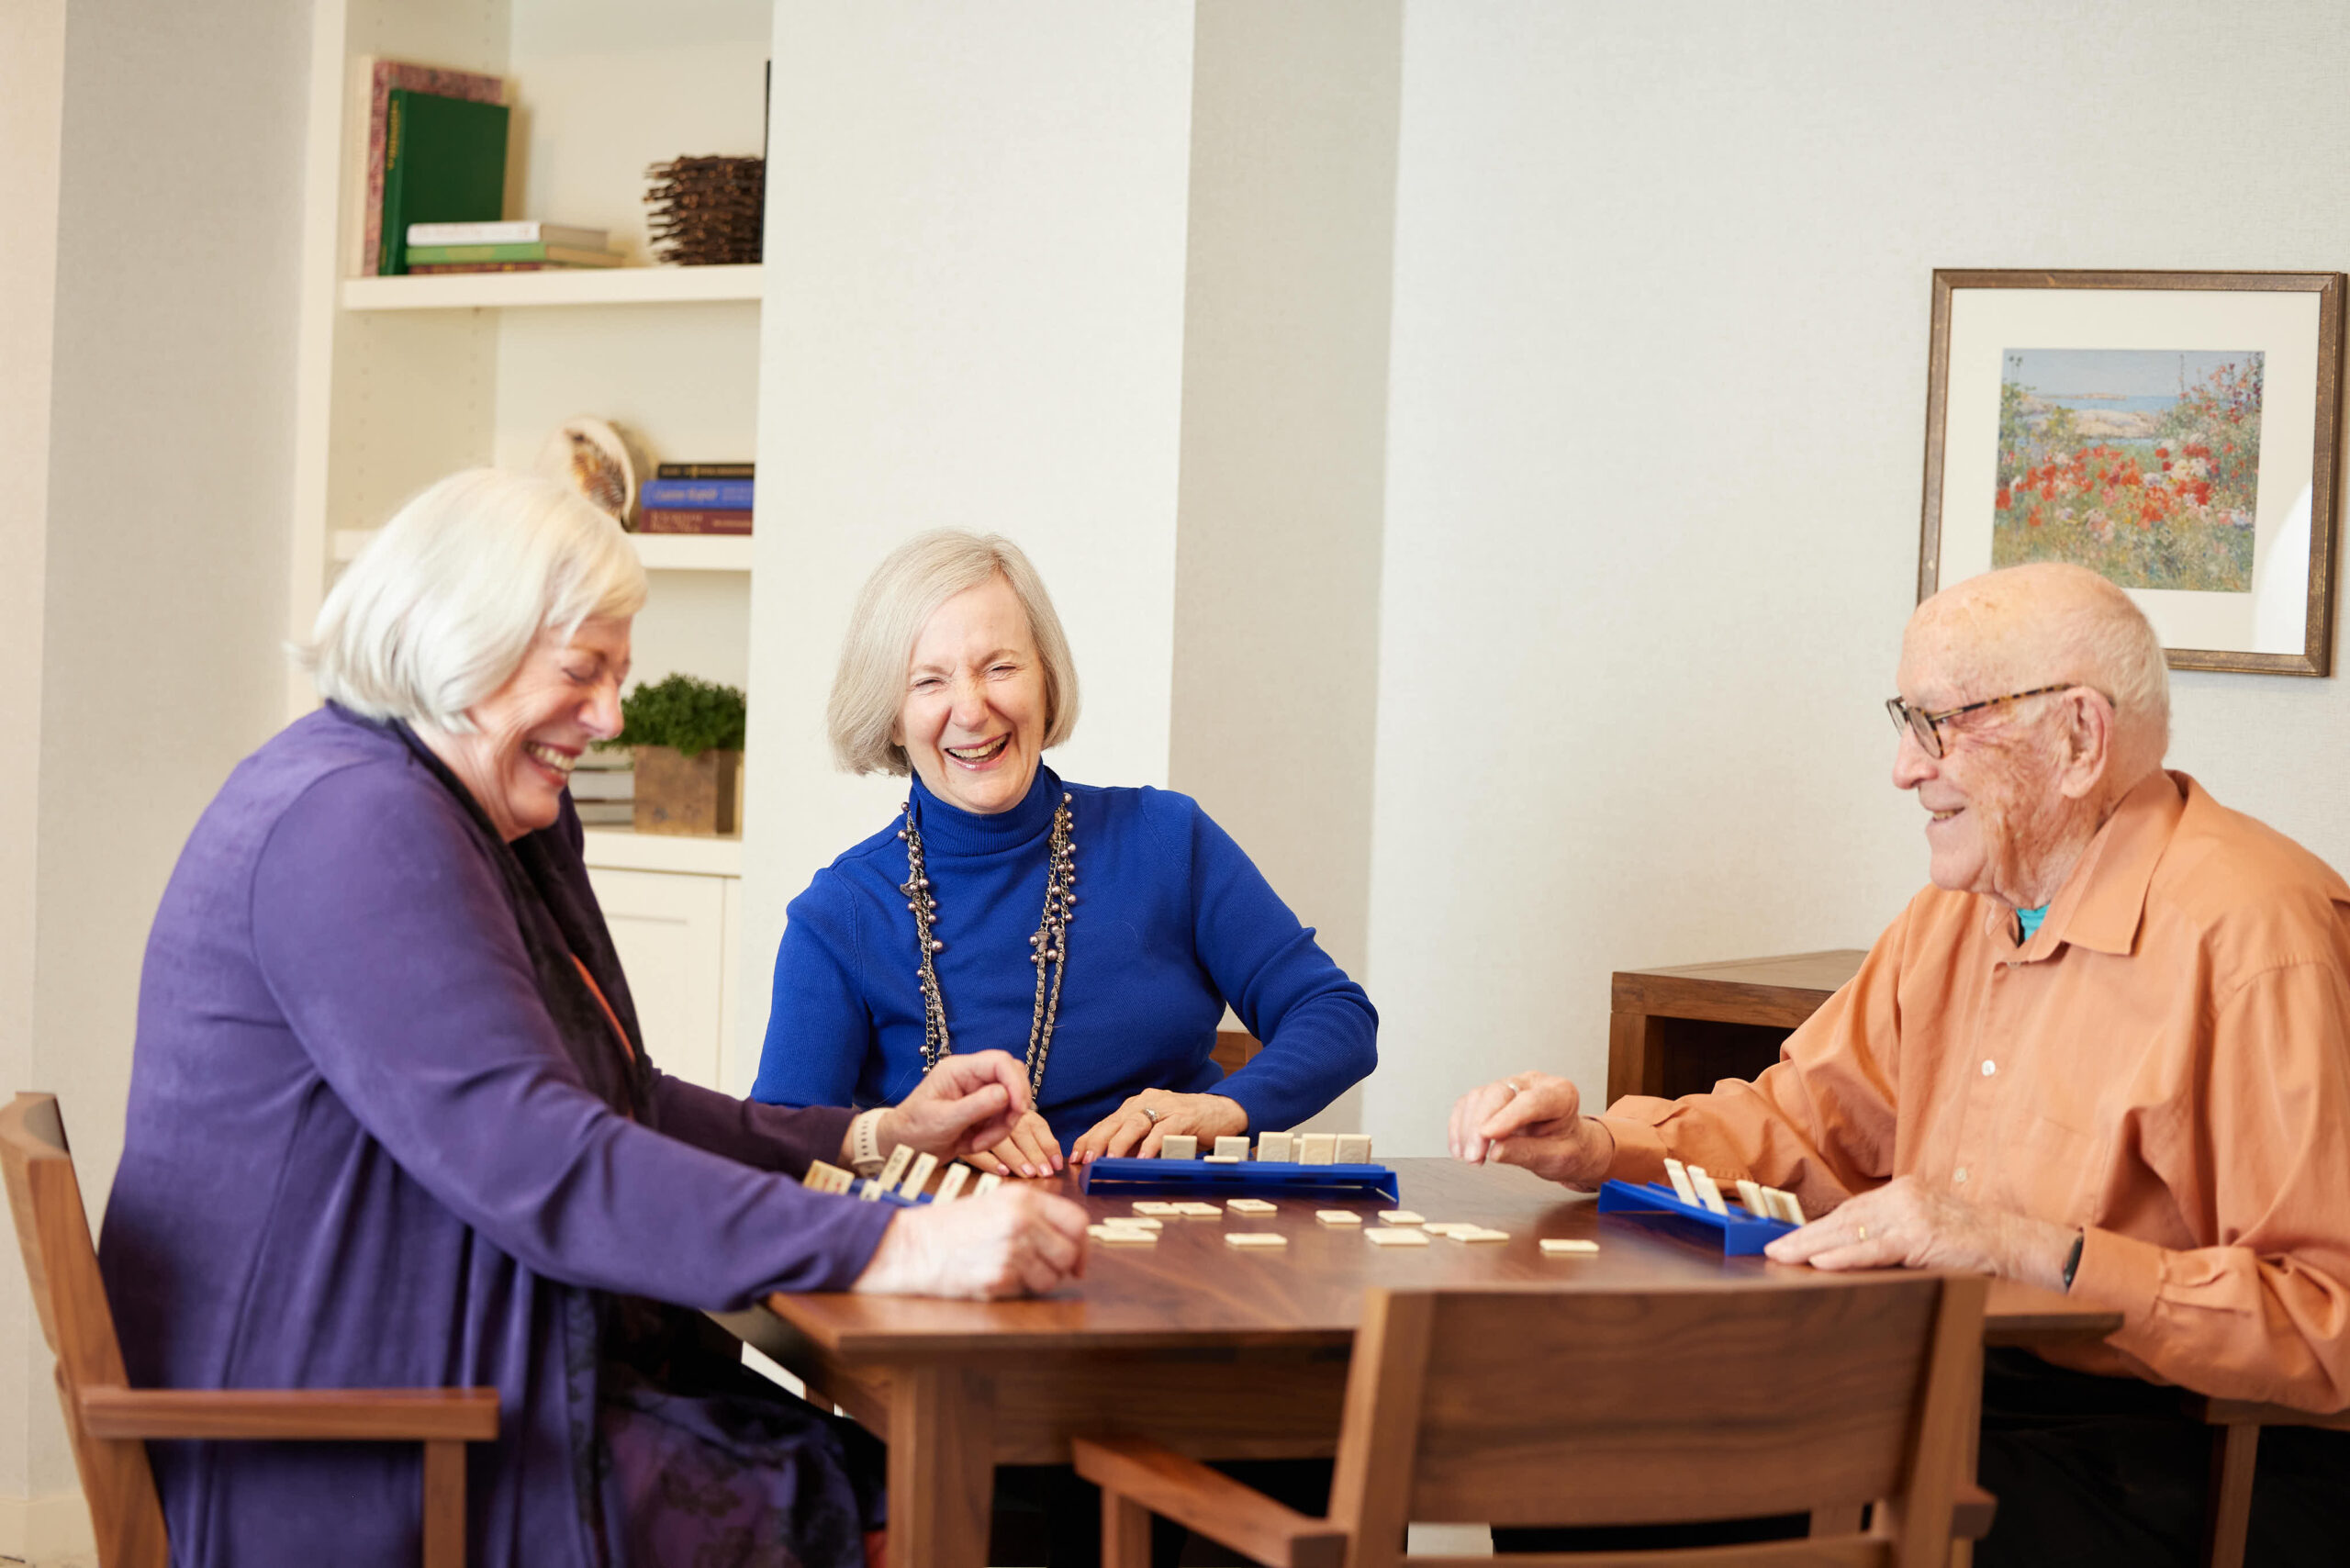 Elderly couple sitting around playing a board game